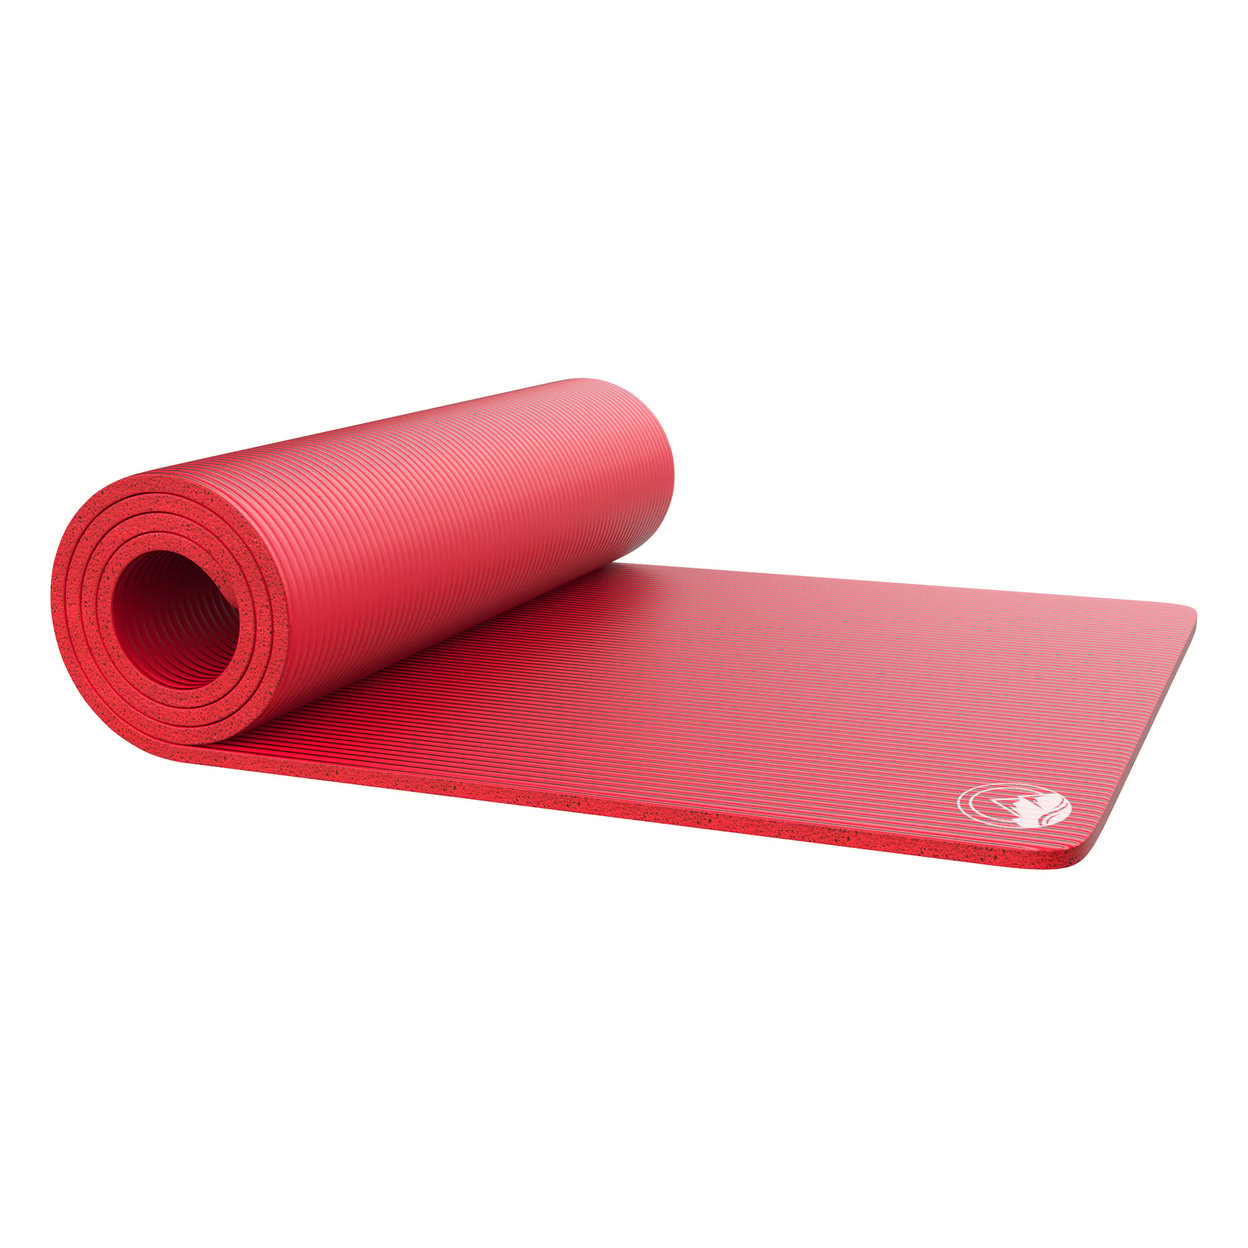 Foam Sleep Pad 1/2 Inch Thick Red Camping Mat For Cots Tents